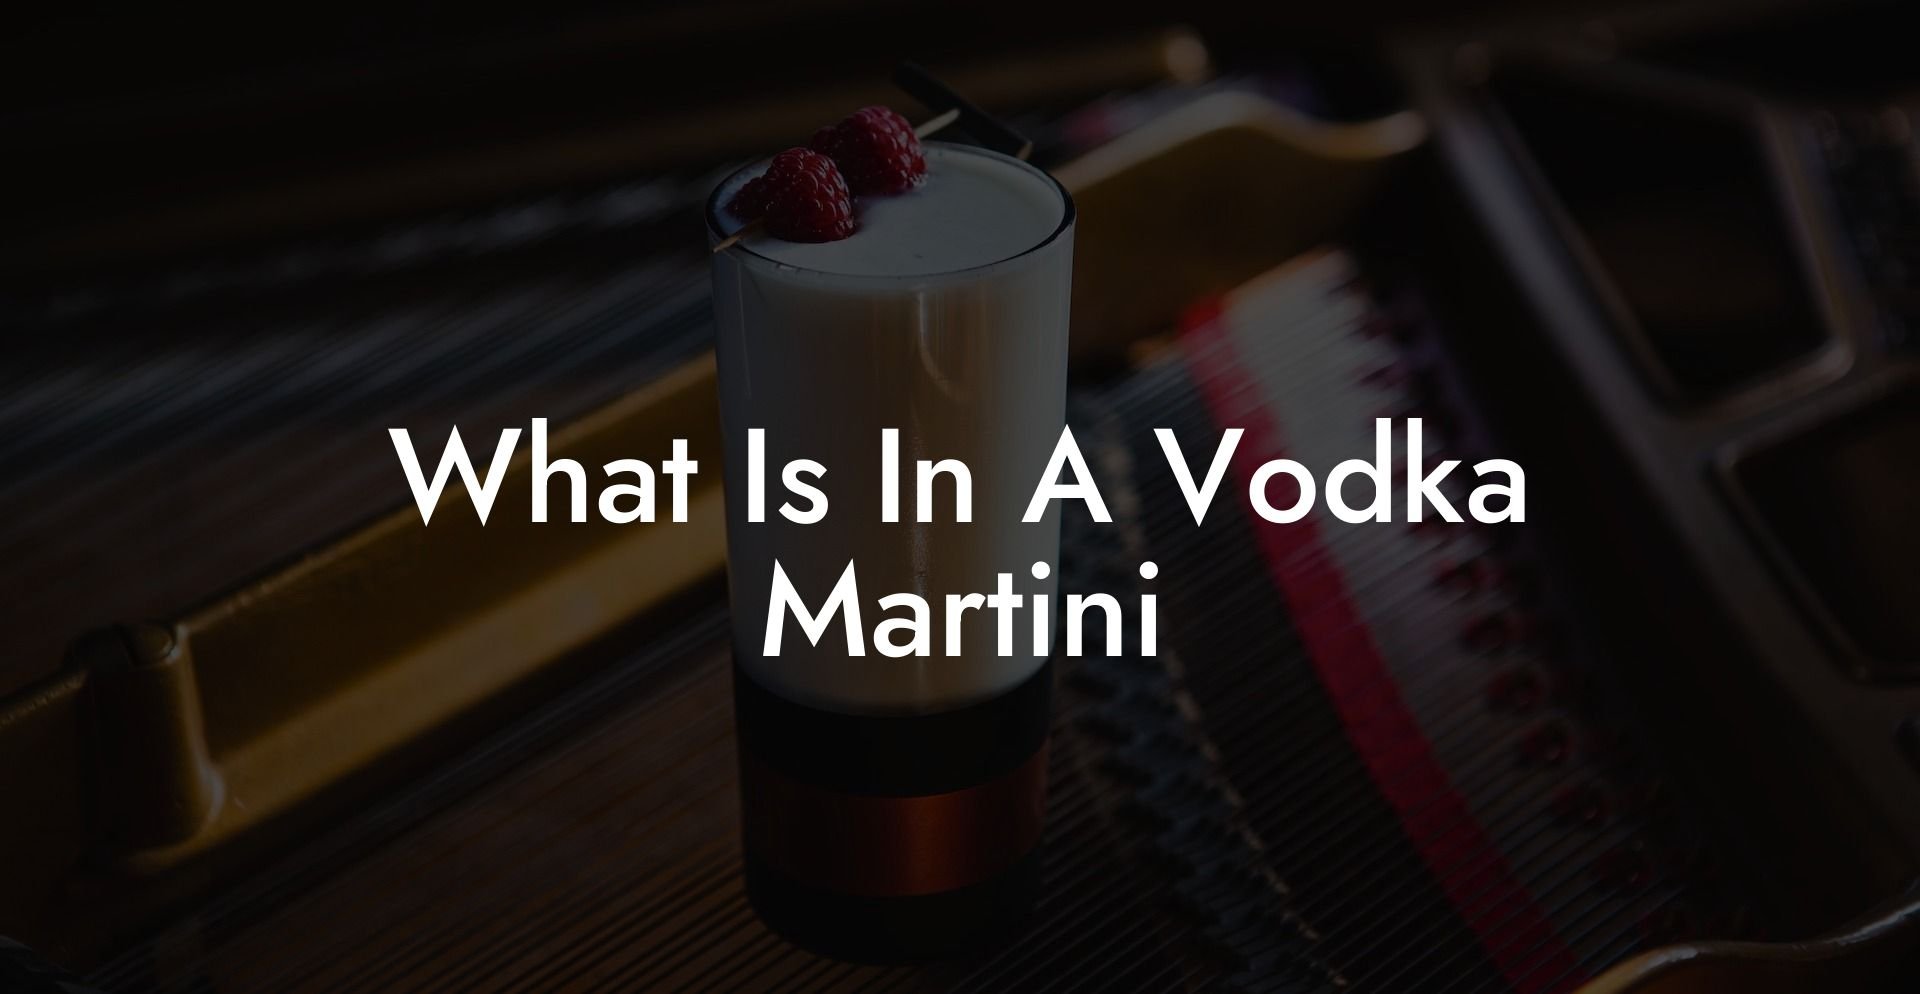 What Is In A Vodka Martini